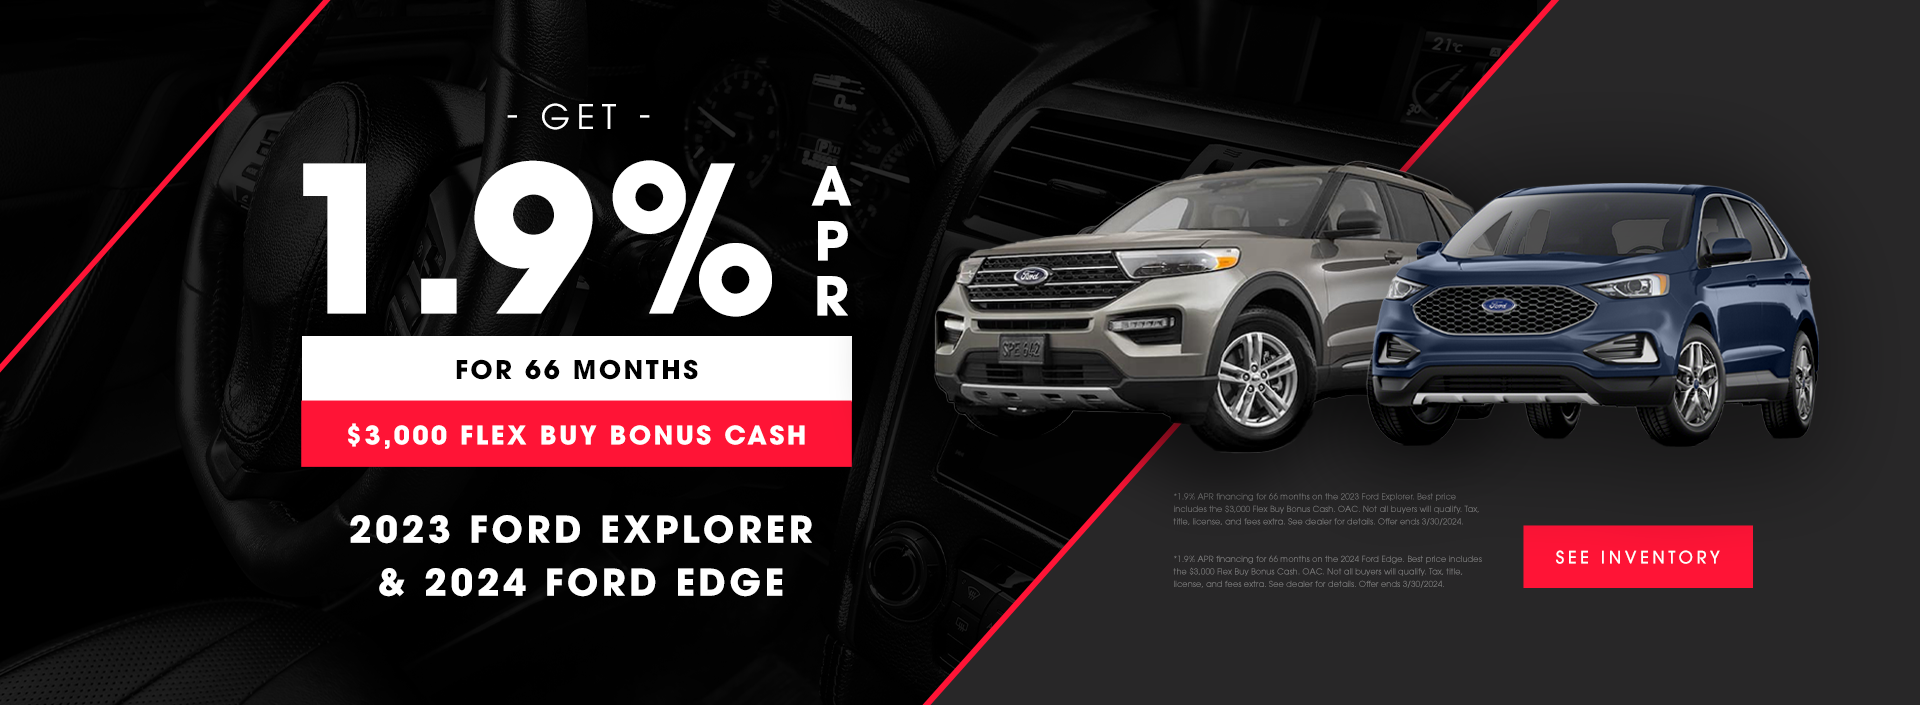 Low APR on Explorer and Edge